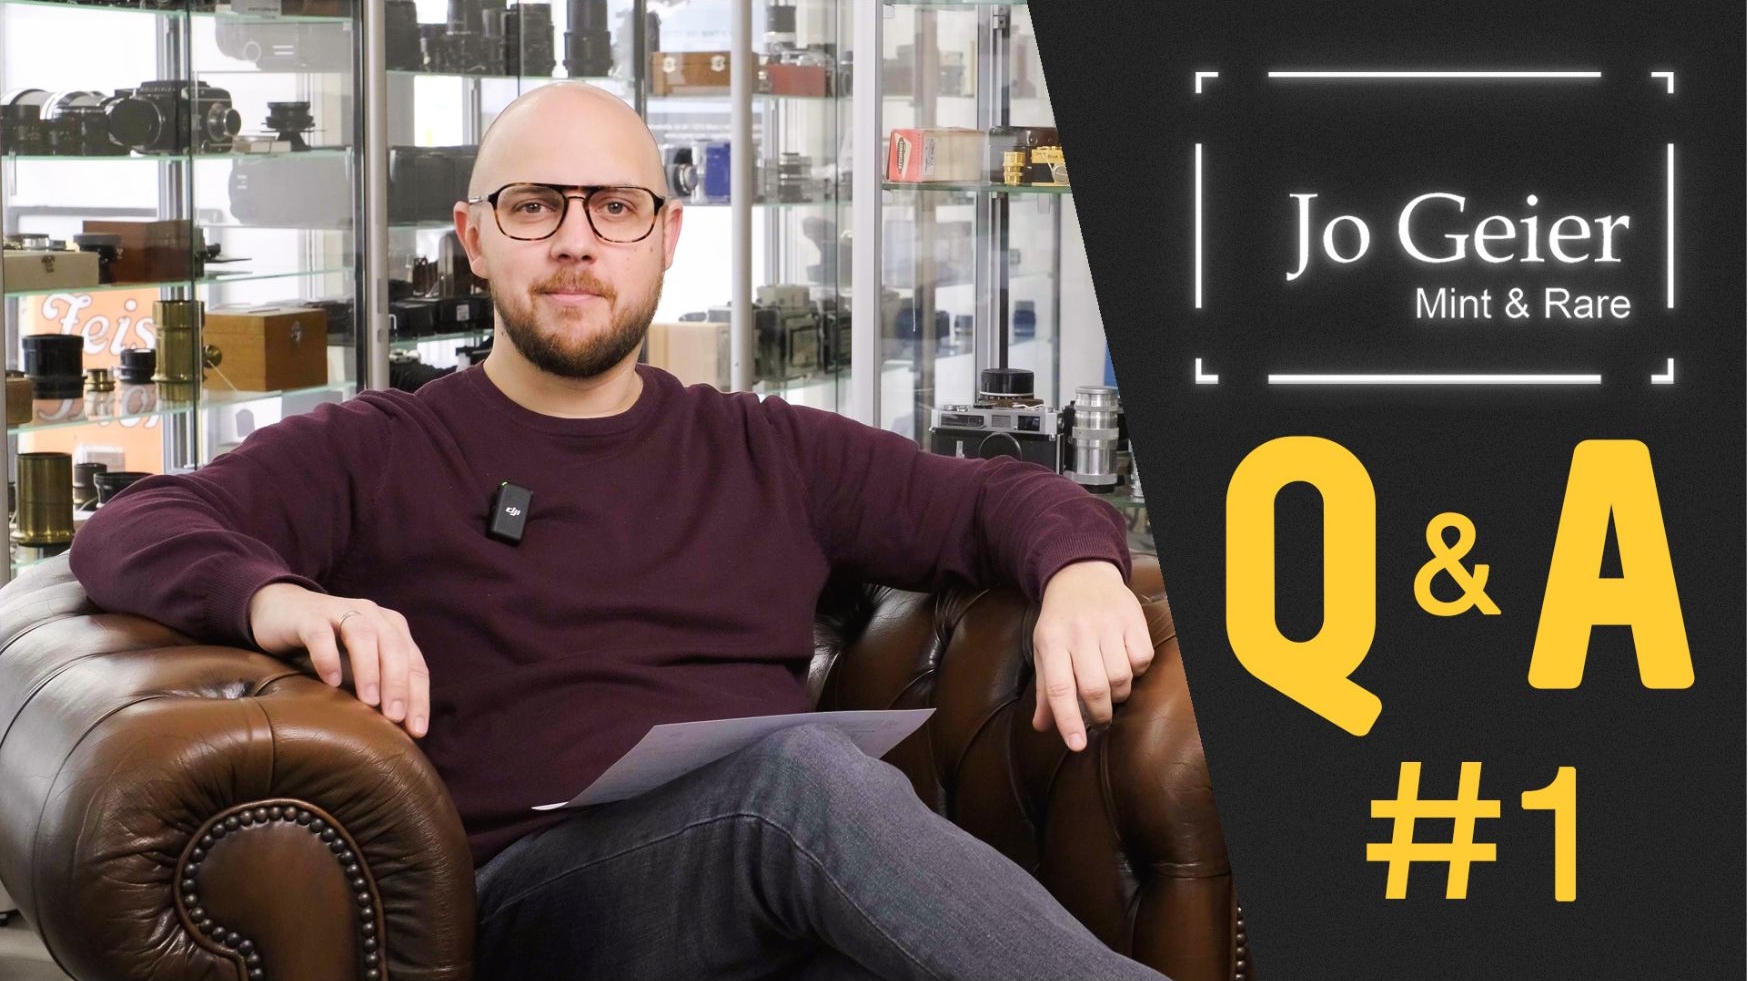 Q & A #:1 Leica hype, the future of film, overrated cameras and giveaway - Jo Geier - Mint & Rare